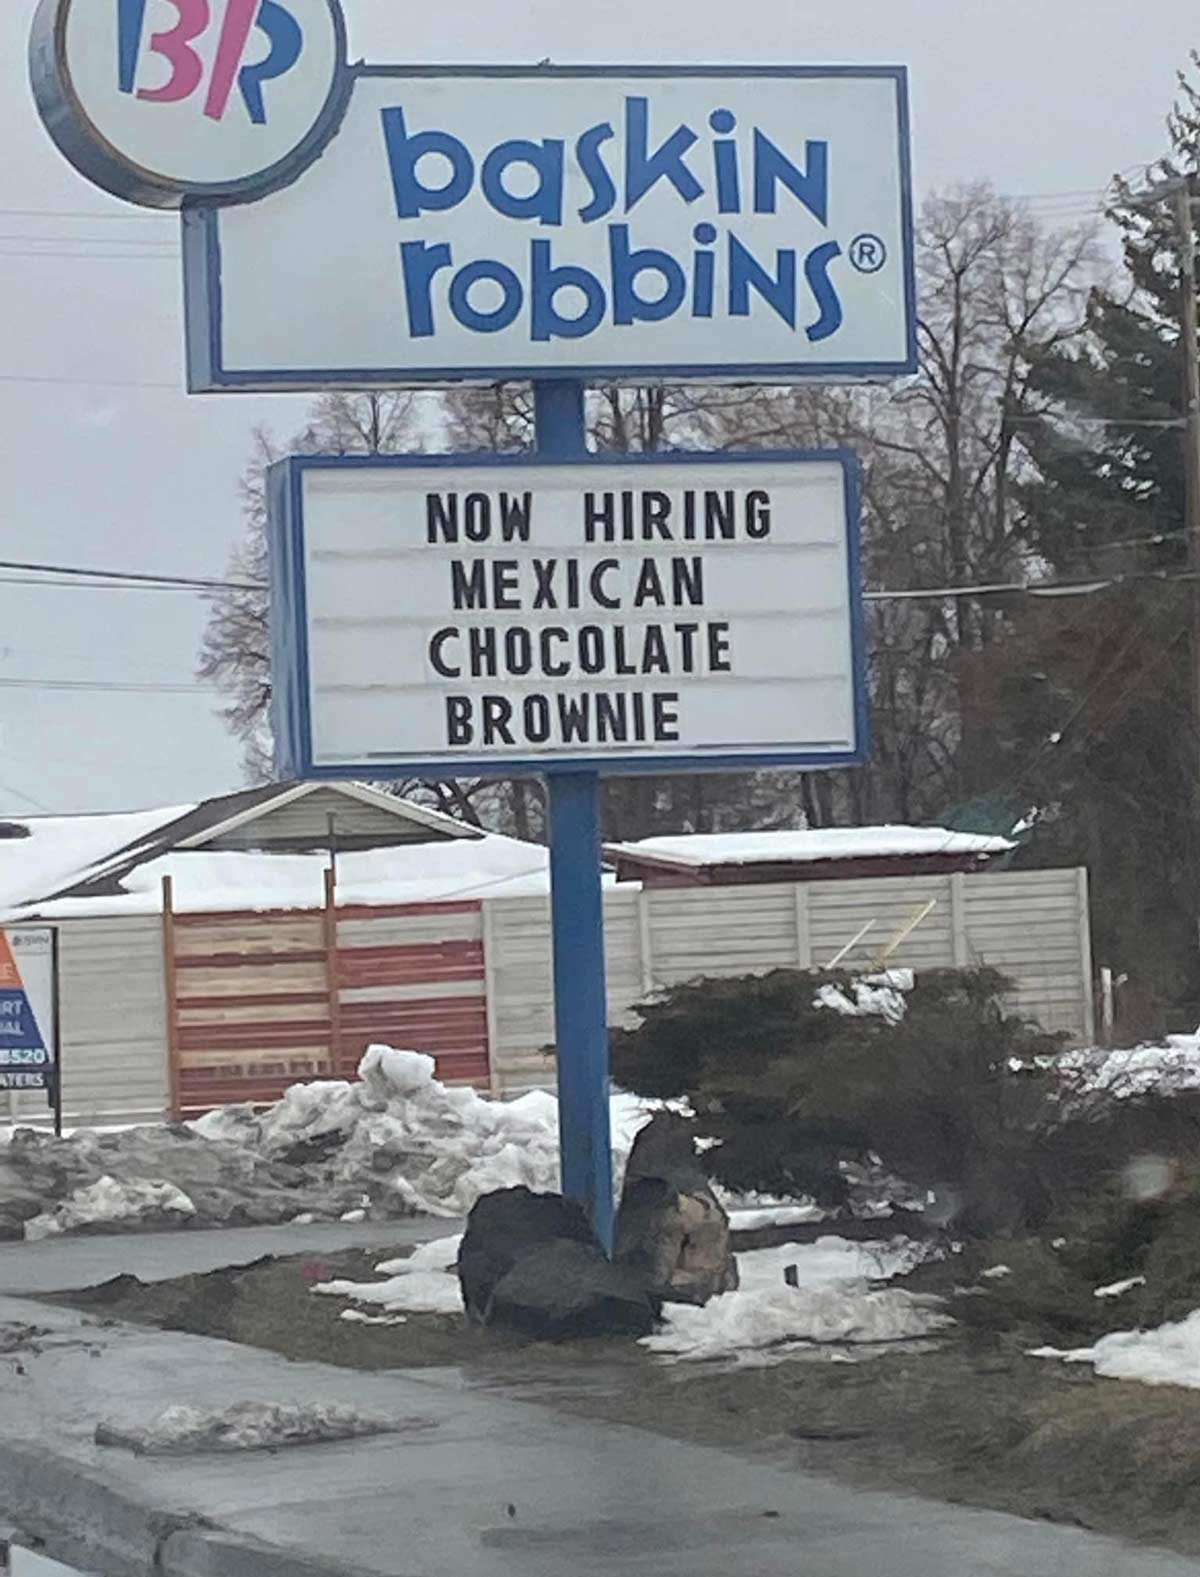 They’re looking for a very specific hire